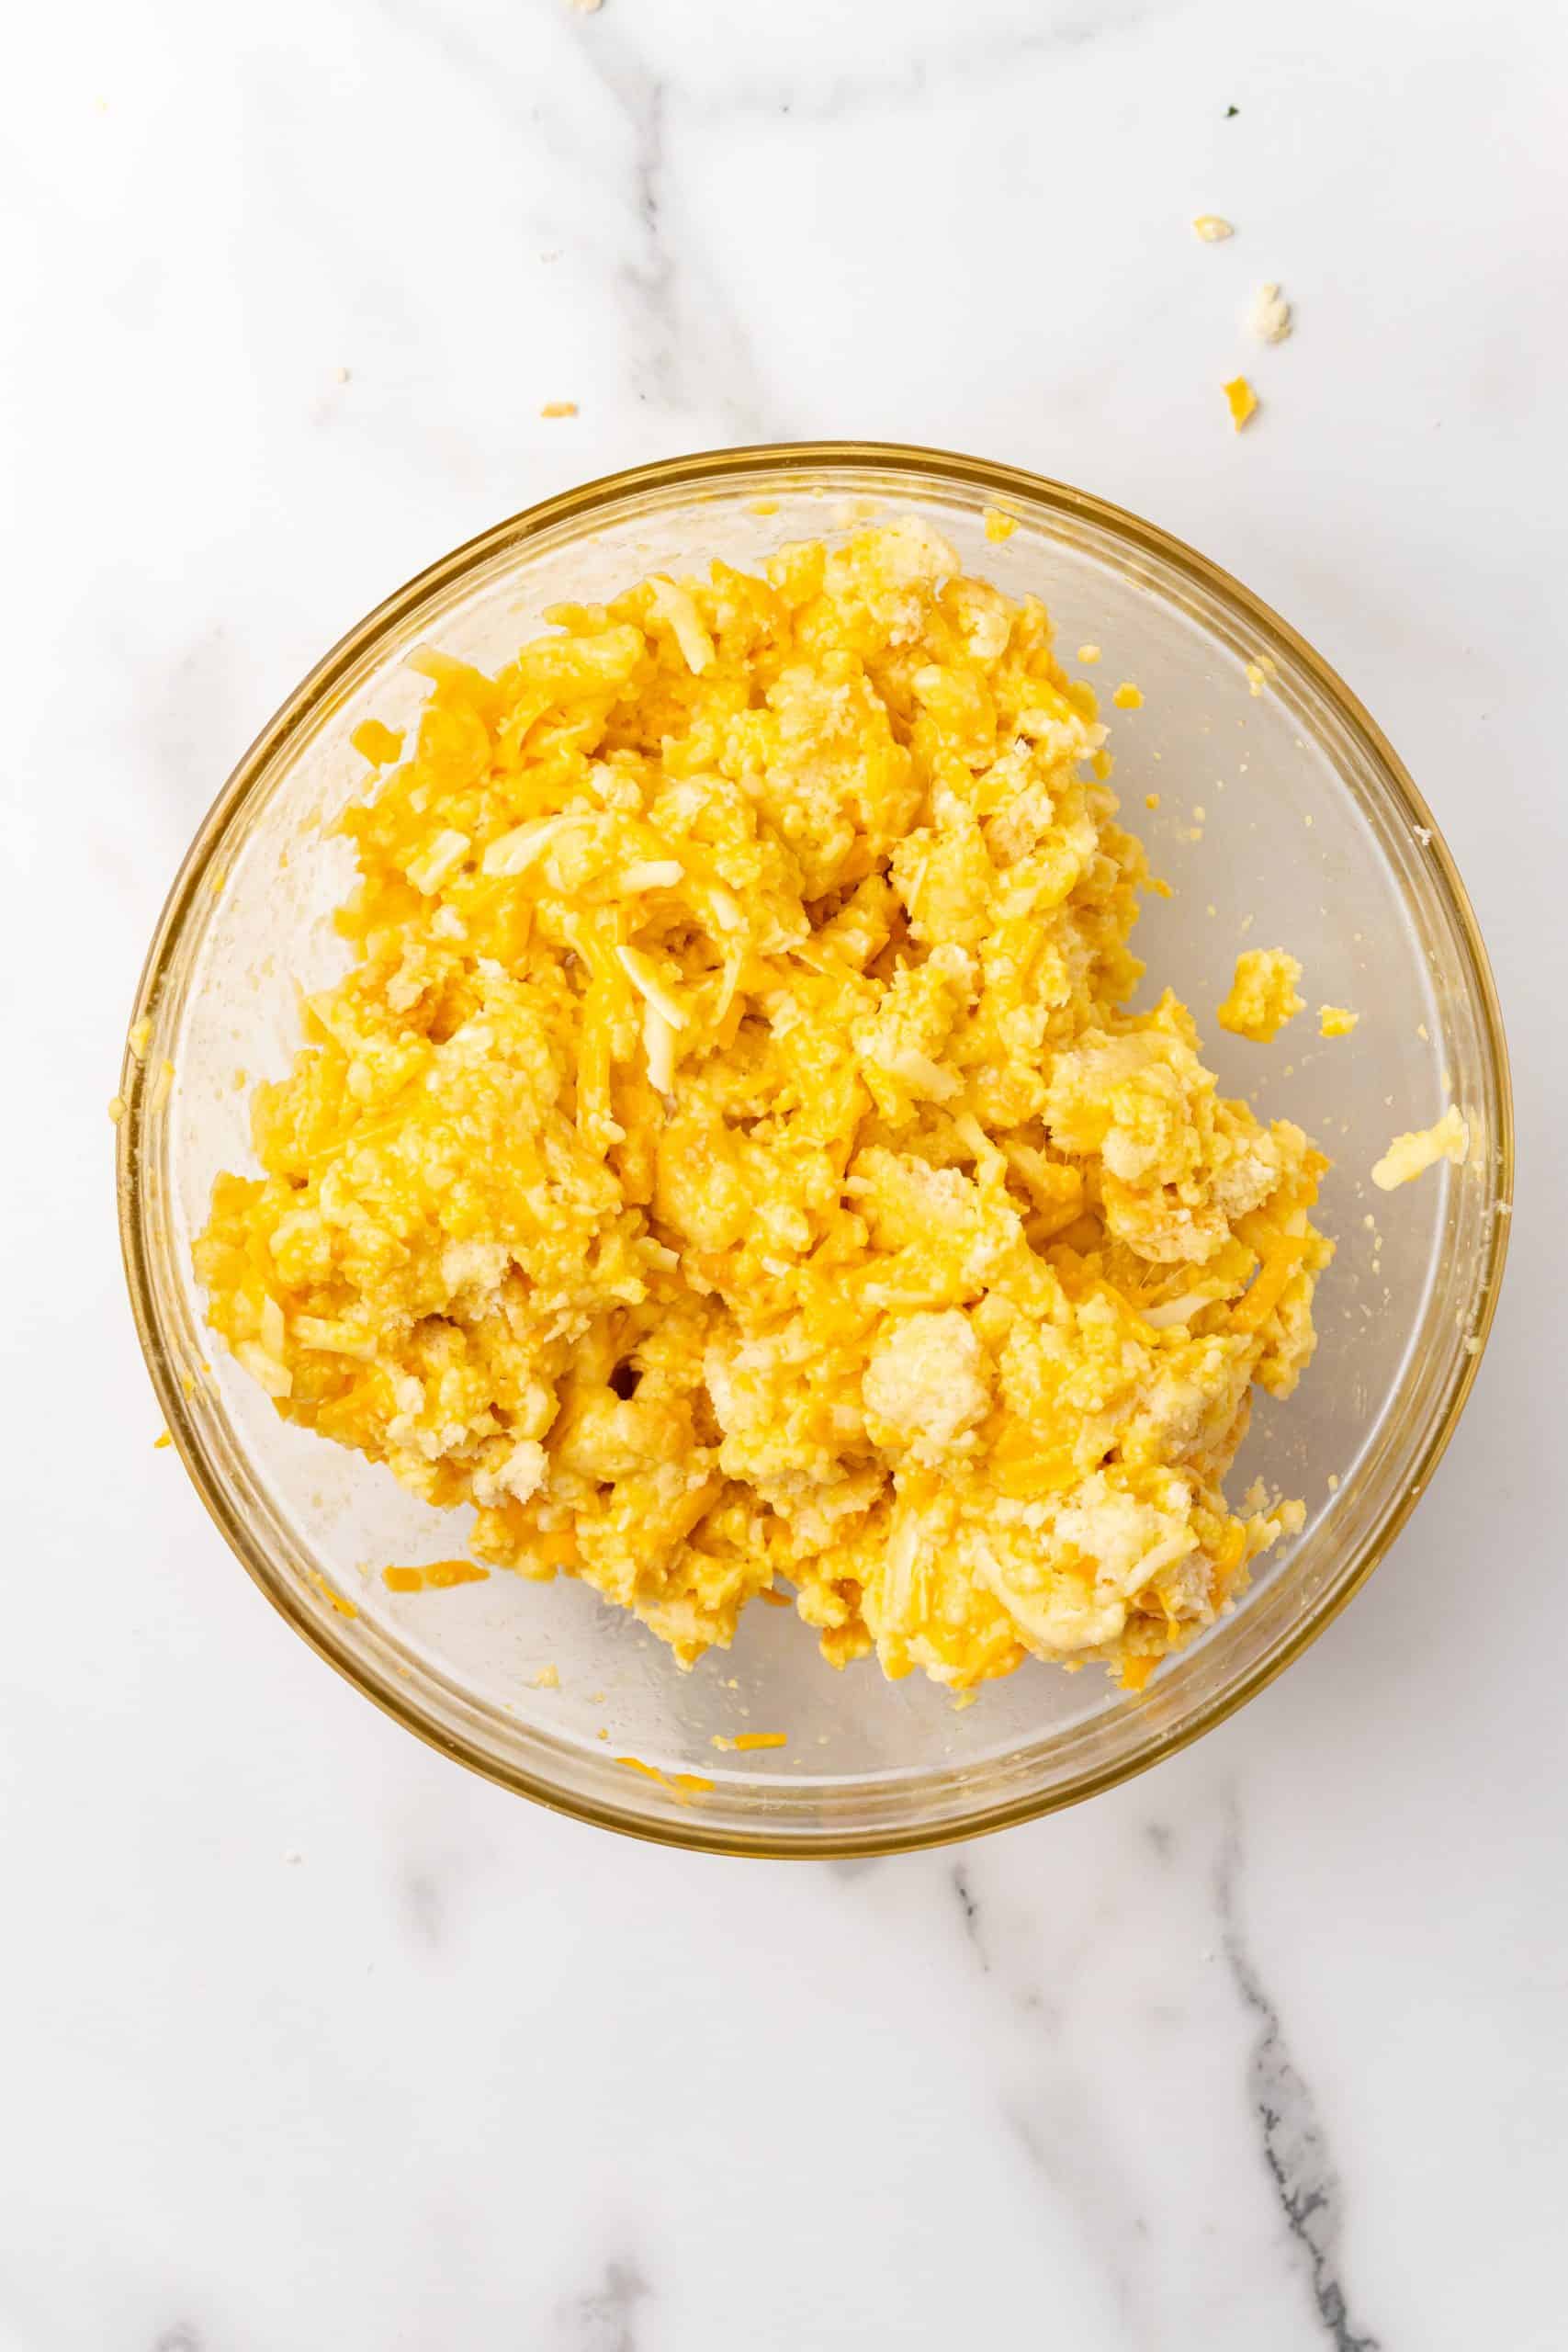 breakfast mac and cheese biscuit topping mixing together in a glass mixing bowl